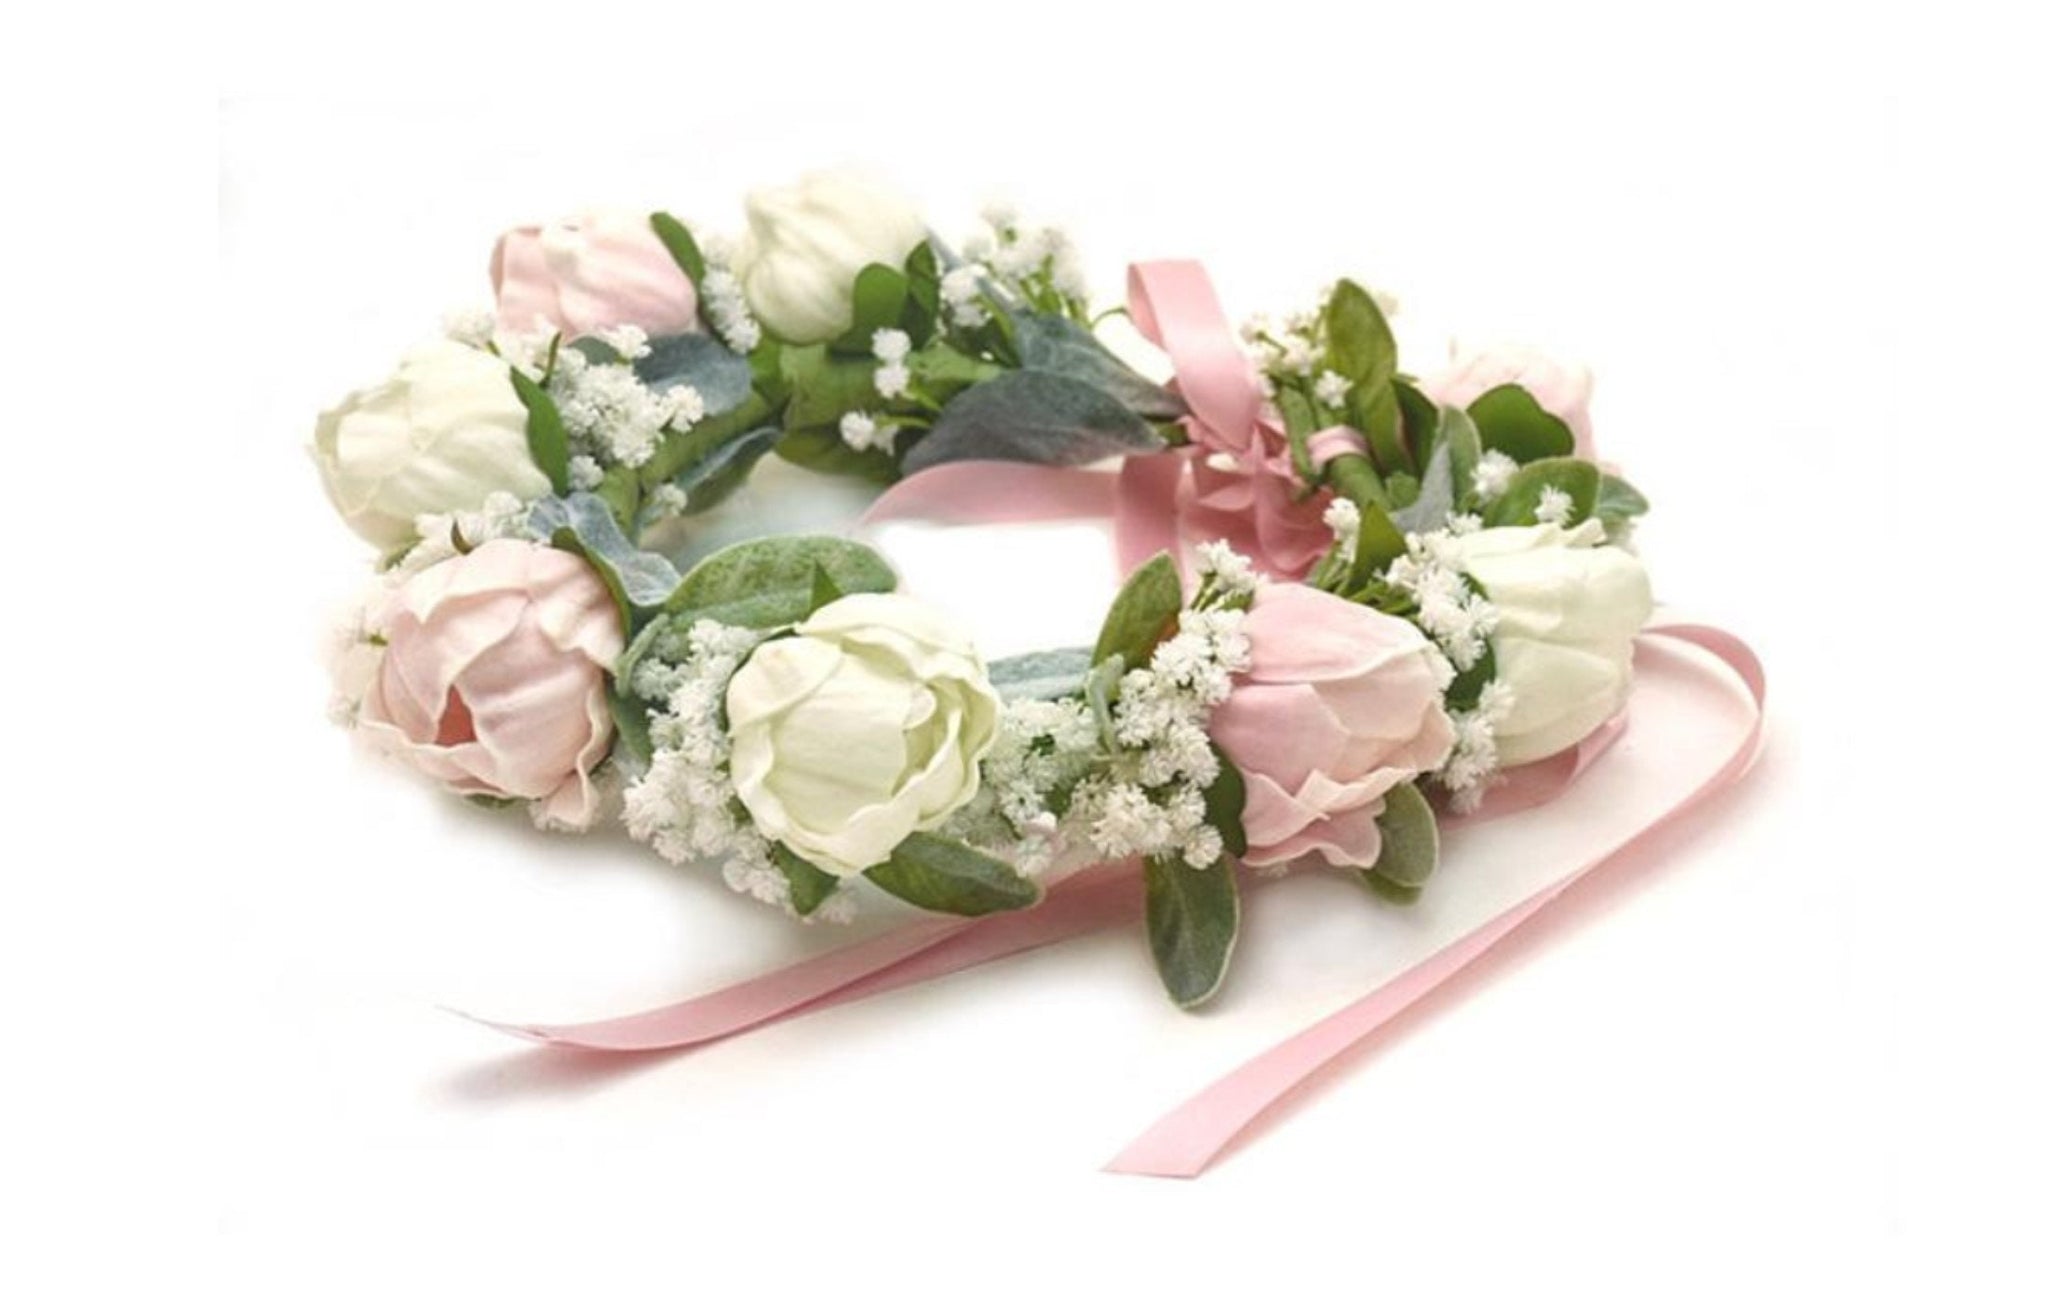 Pink White Peonies & Roses Bridal Prom Bouquet Eucalyptus Greenery - Add Groom Boutonniere Wedding Arch Flowers Centerpiece Corsage More!